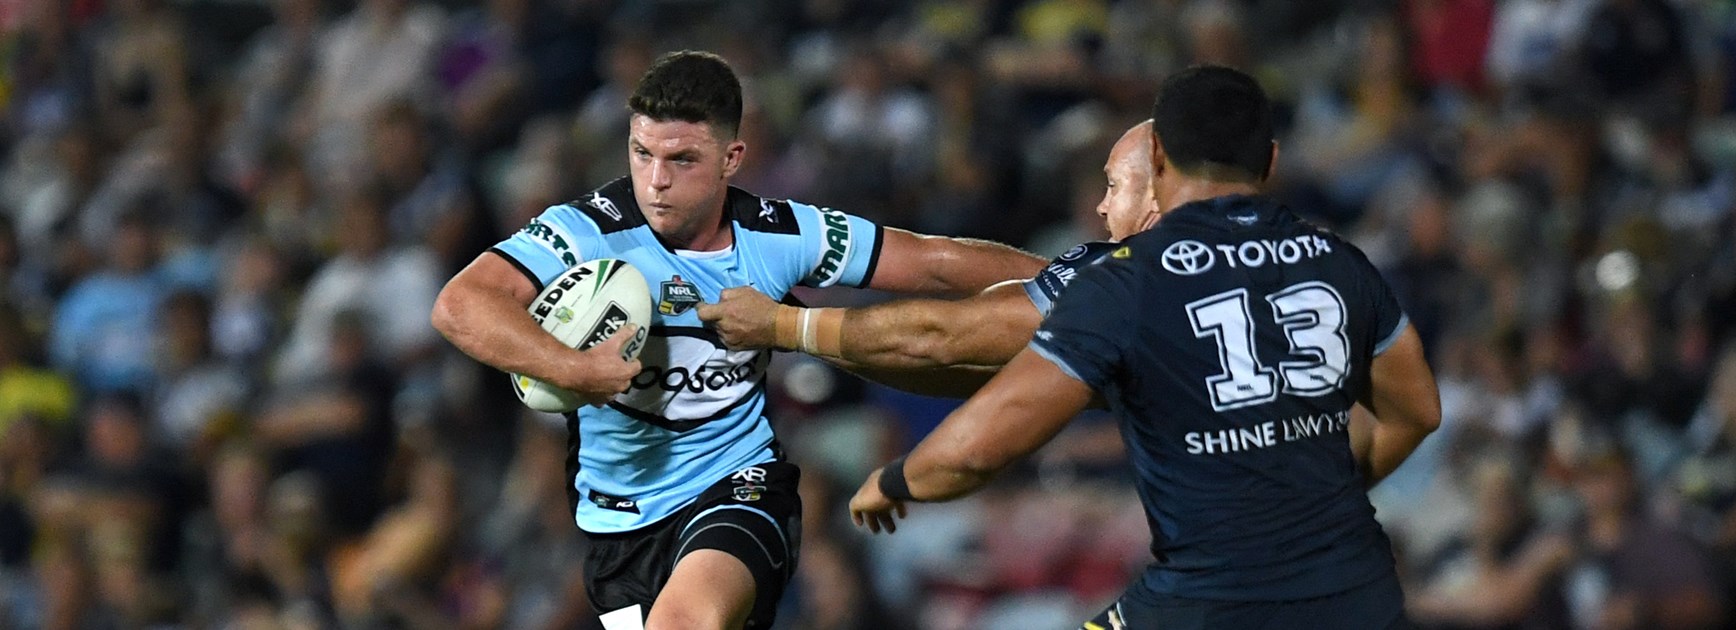 Townsend switches from Sharks to join Warriors for rest of season